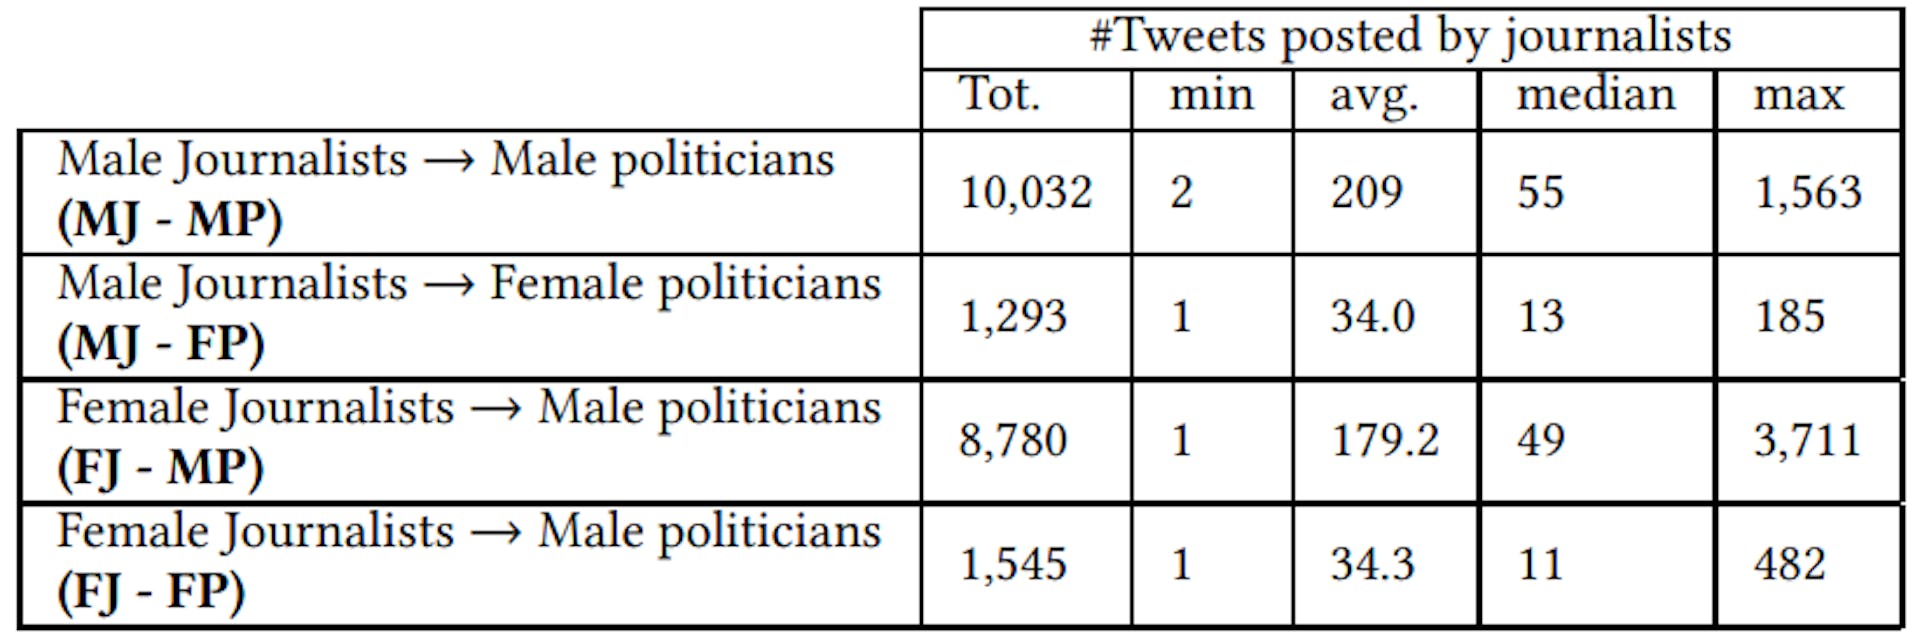 Table 1: The # of tweets posted by Indian journalists mentioning politicans. The Female politicians received relatively less mentioned tweets.